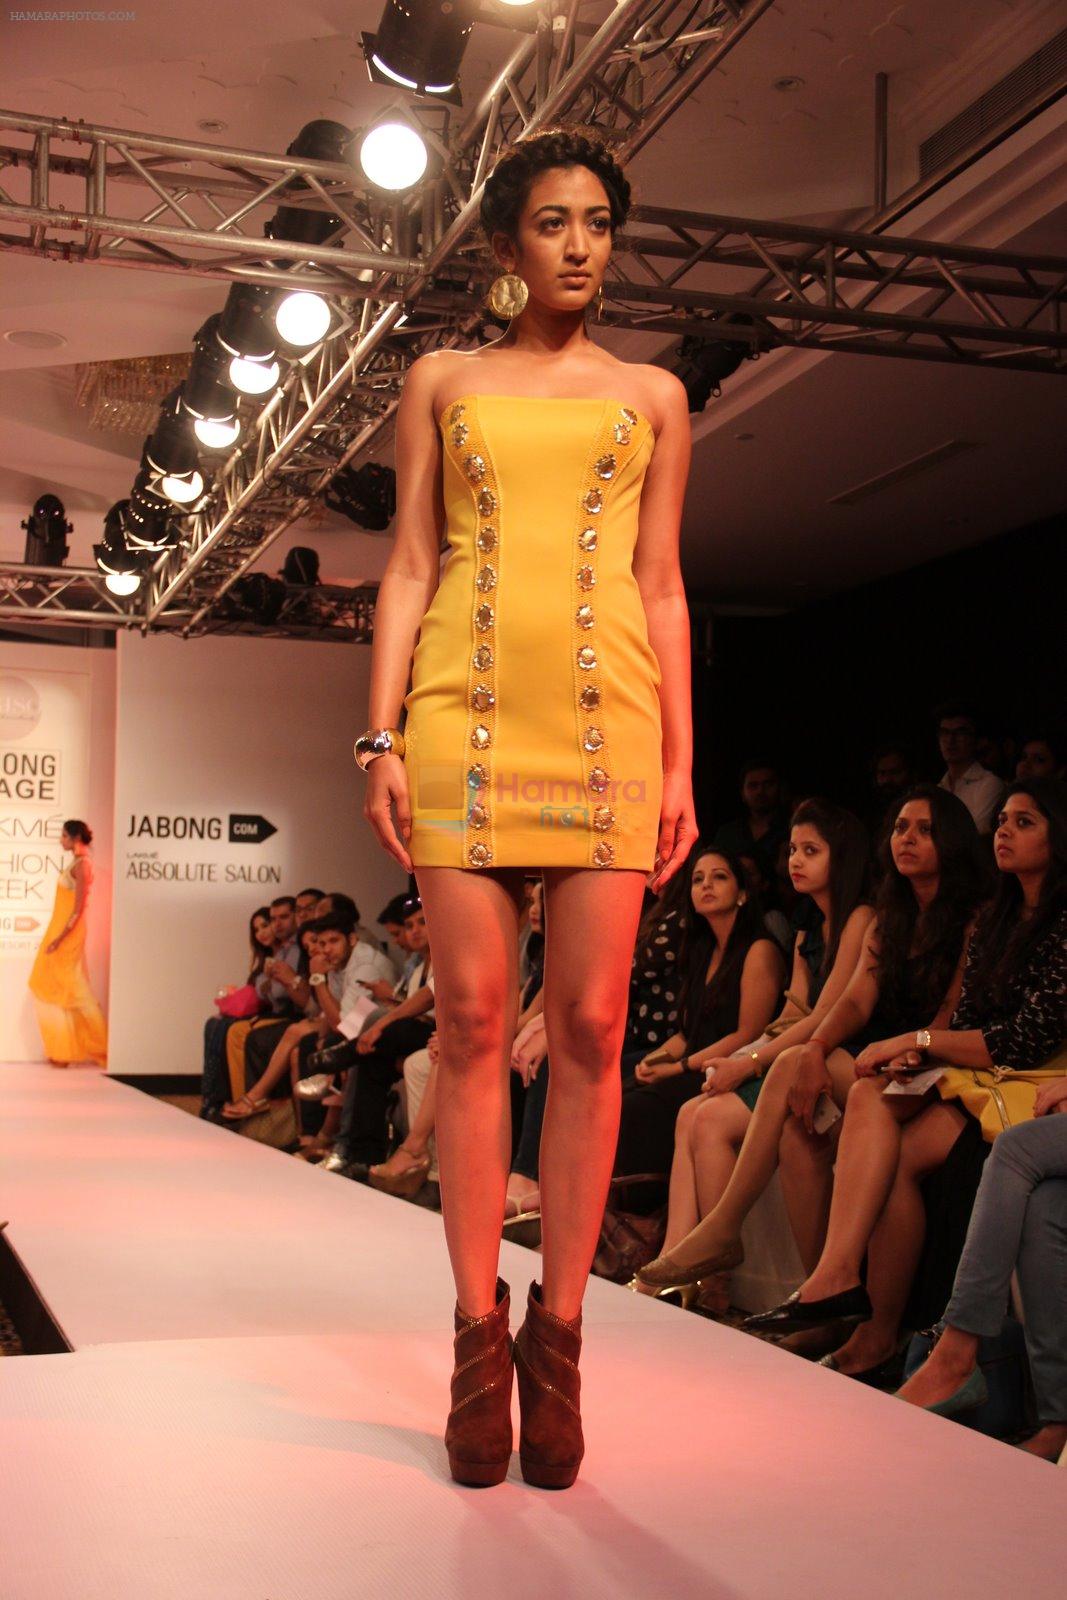 Model walk the ramp for RRISO Show at Lakme Fashion Week 2015 Day 5 on 22nd March 2015